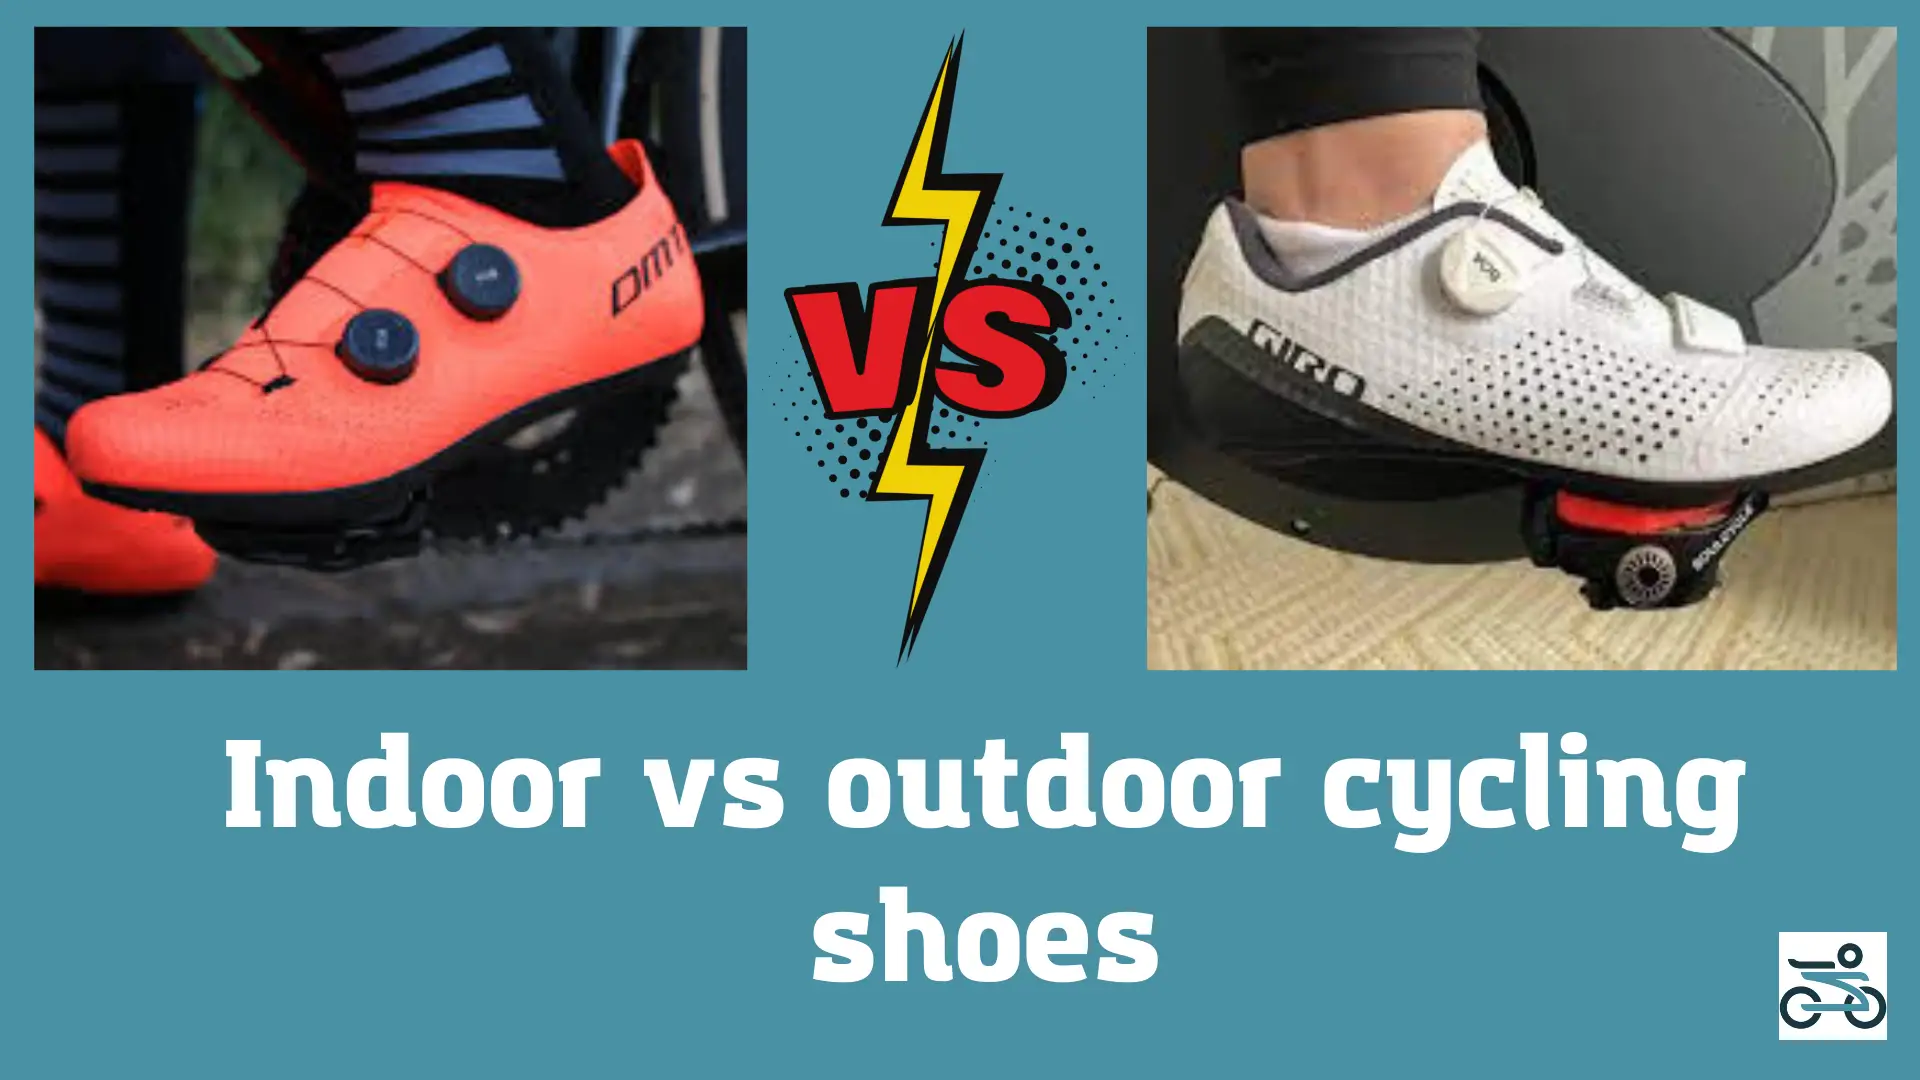 Indoor vs outdoor cycling shoes - what is the difference